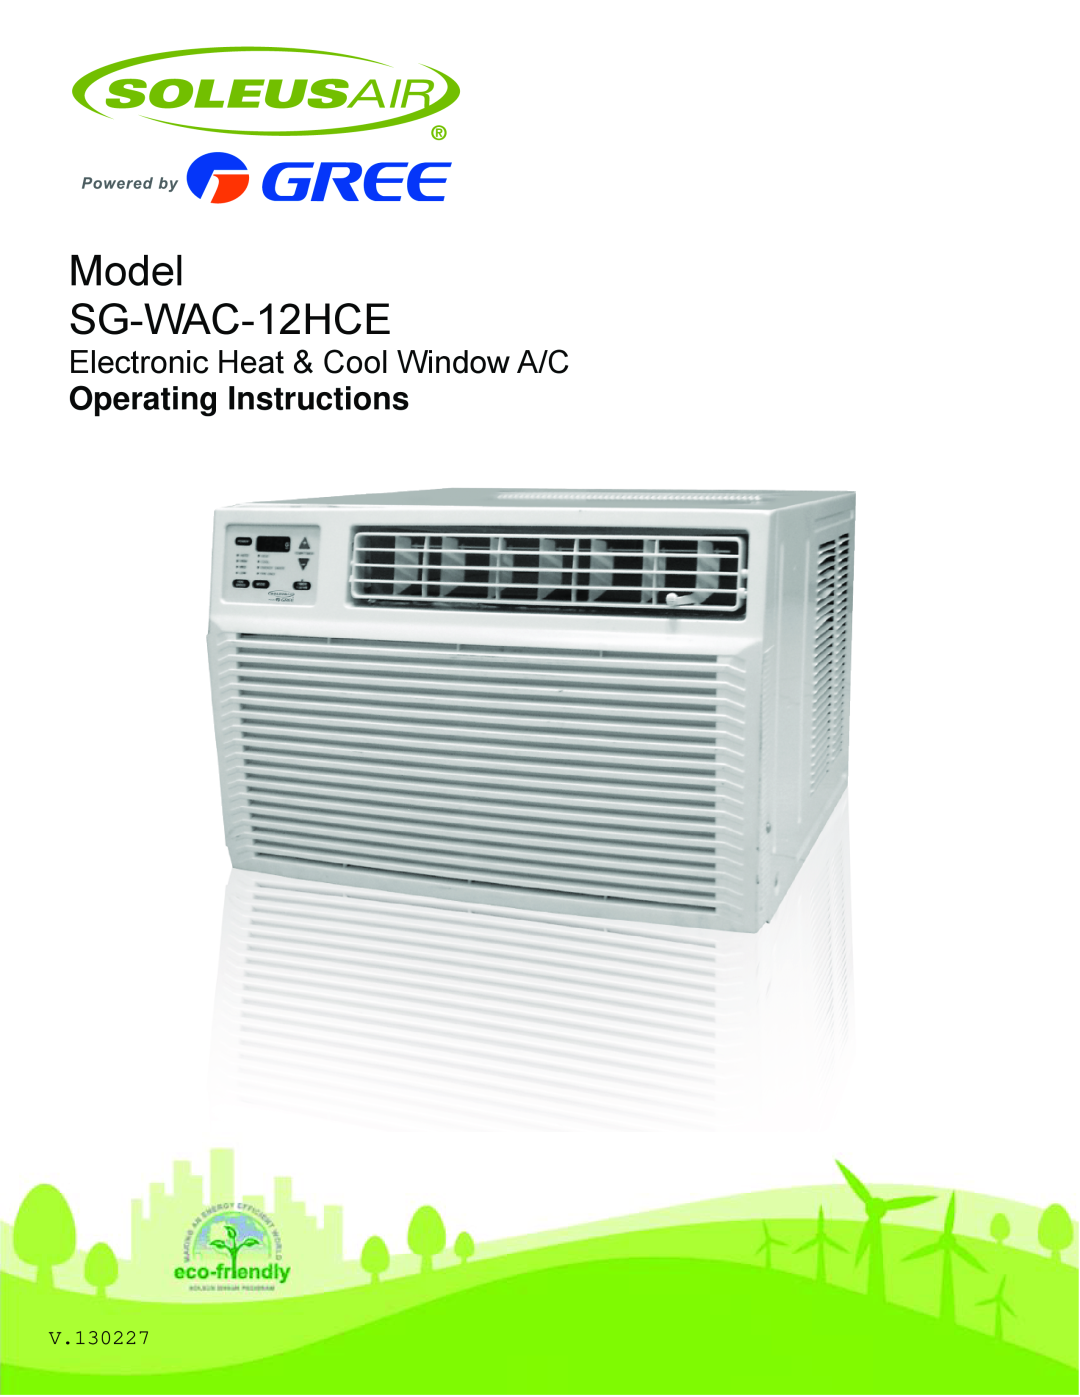 Soleus Air operating instructions Model SG-WAC-12HCE, Electronic Heat & Cool Window A/C, Operating Instructions 